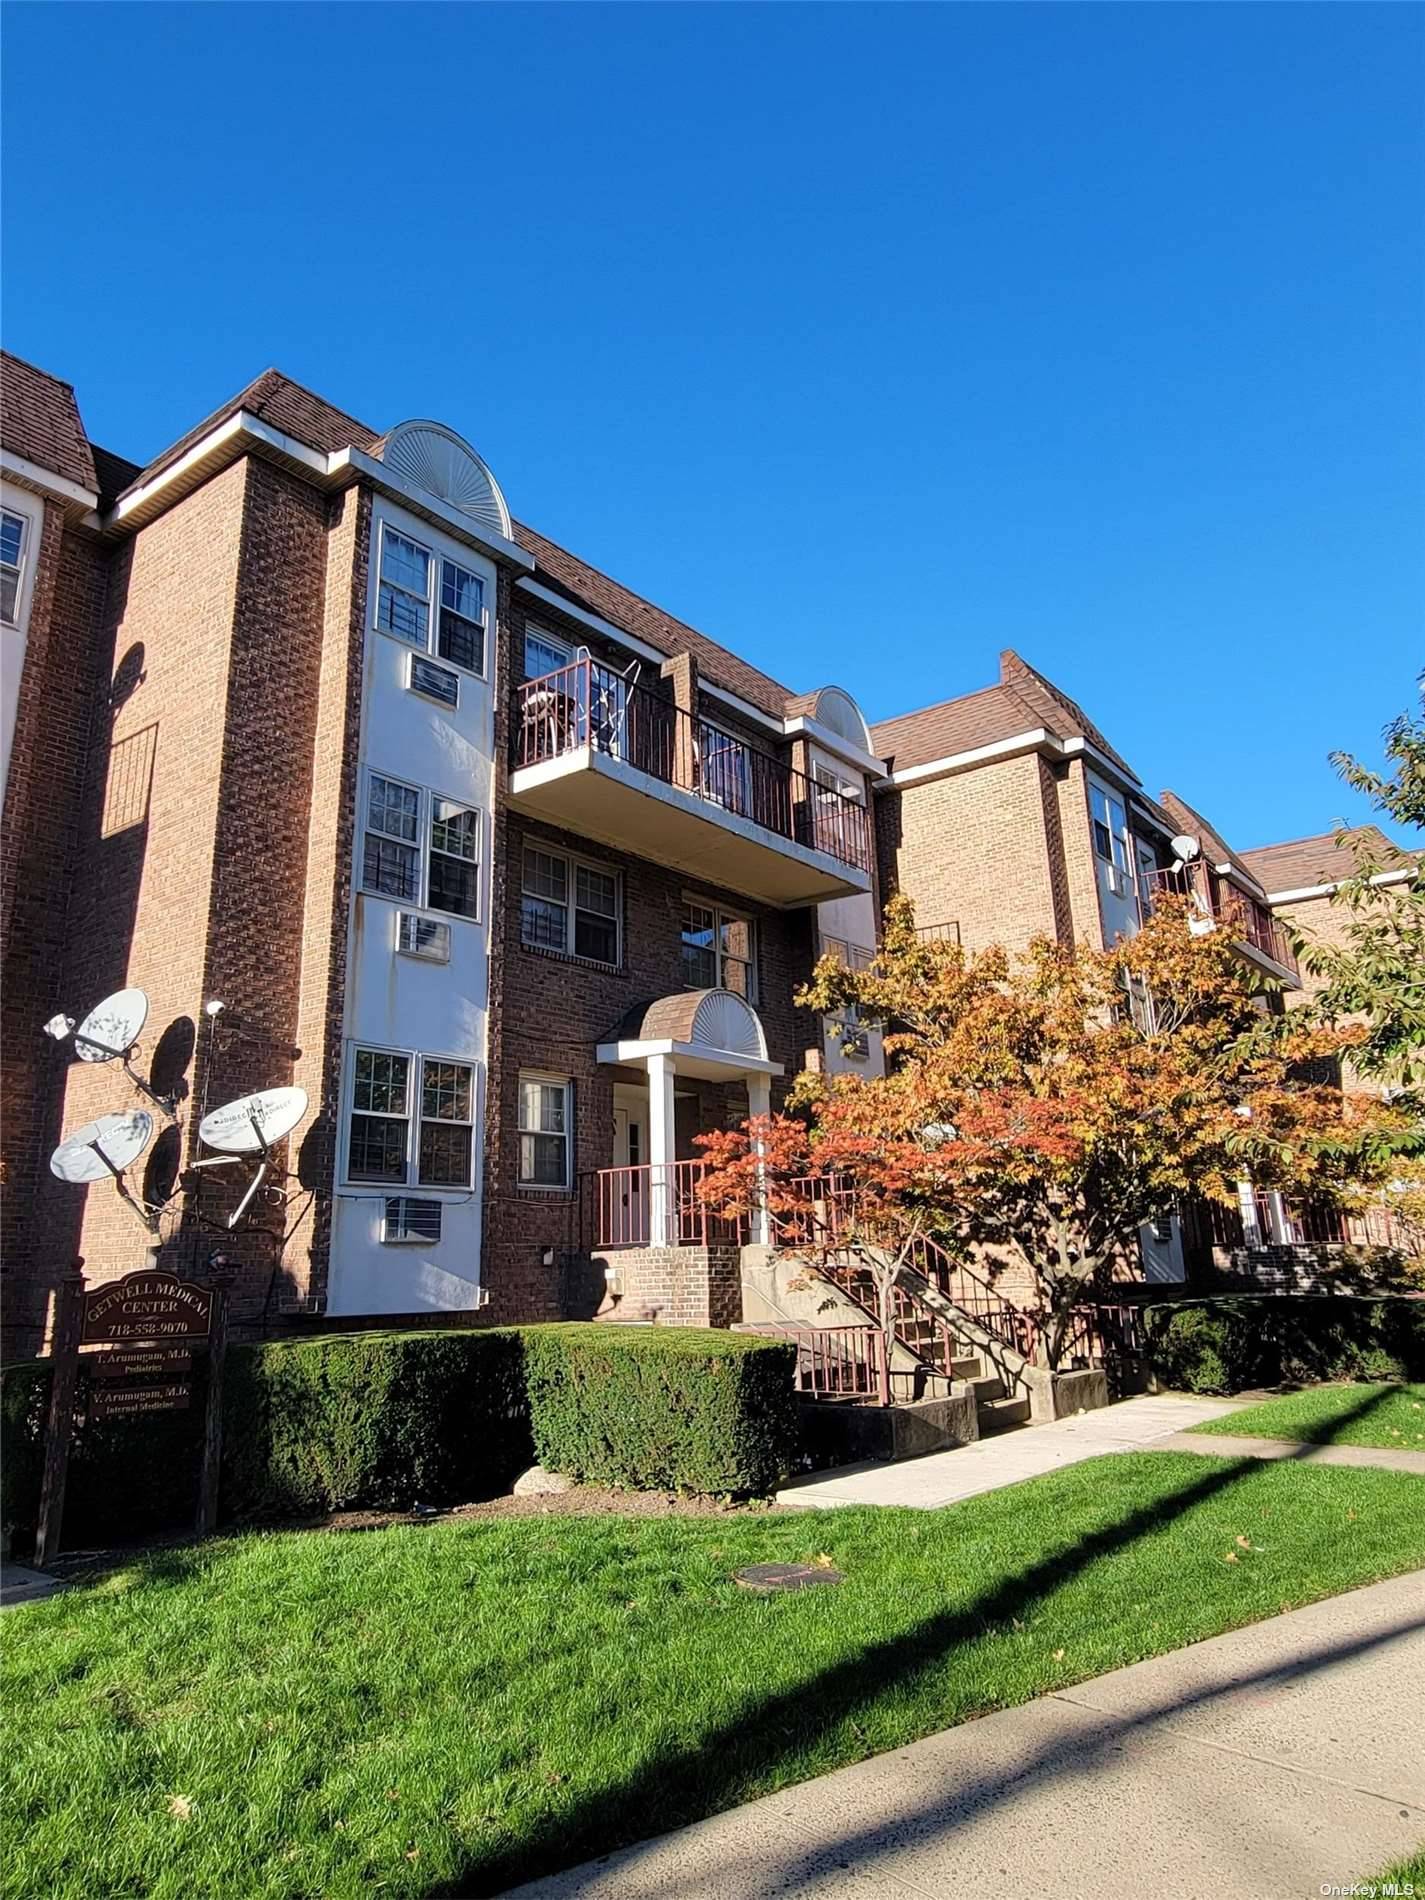 Great Opportunity to live in a beautiful DUPLEX Condo with 2 Bedrooms and 2.